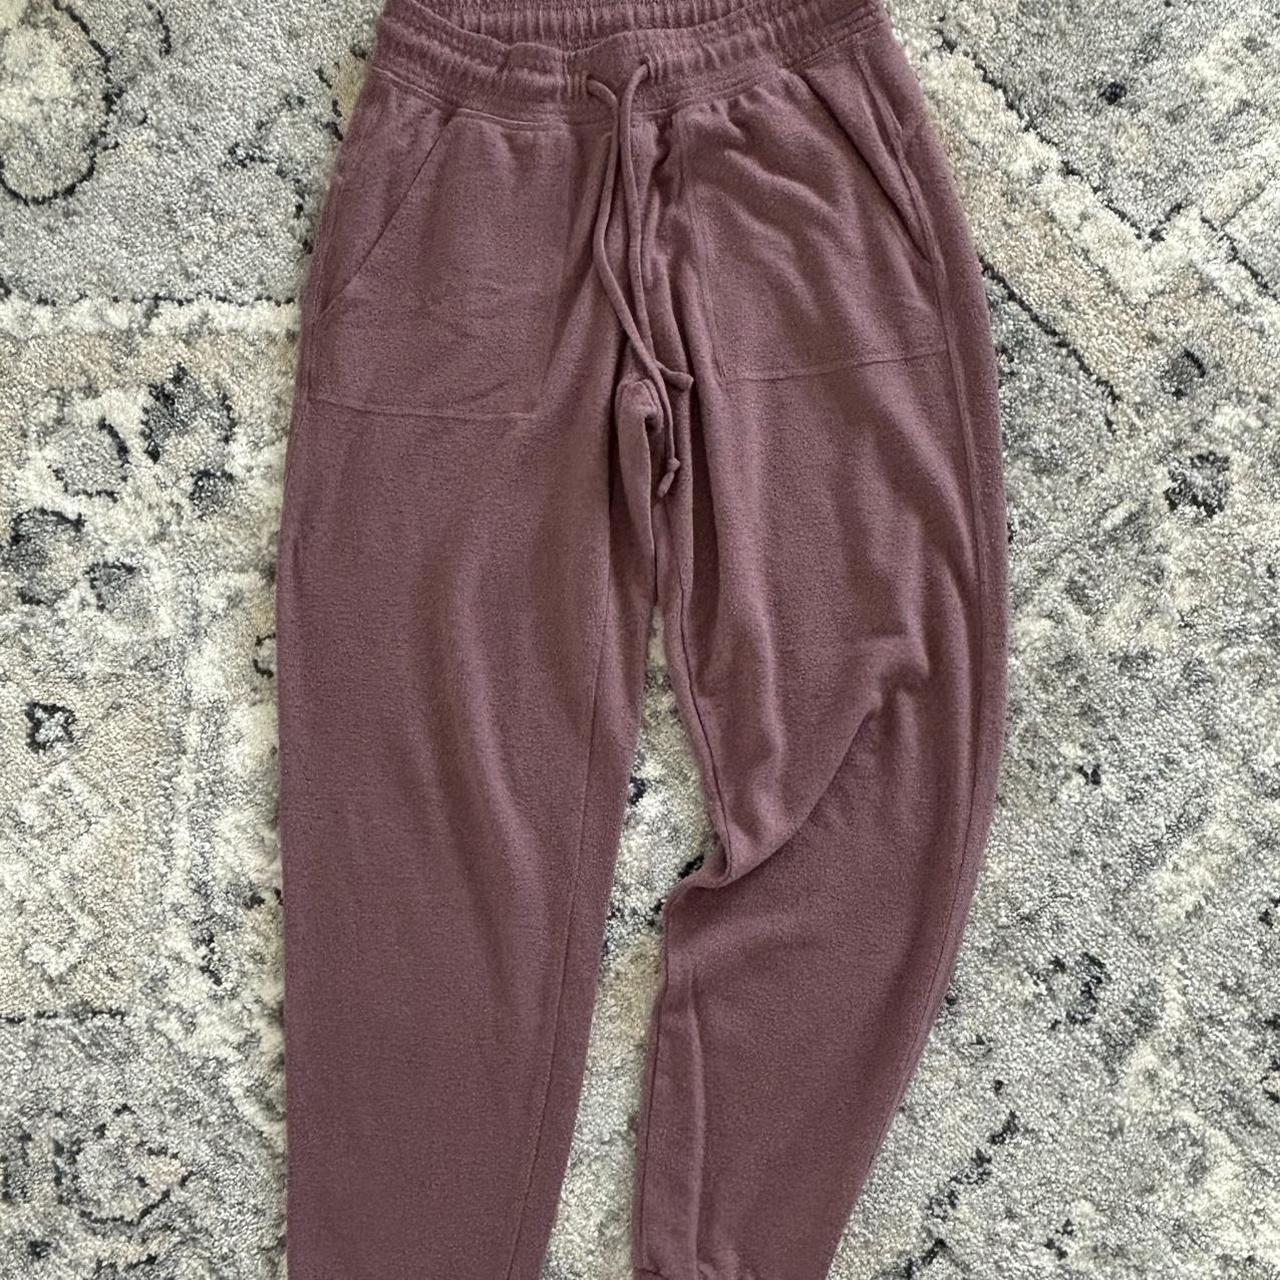 Alo- woman's joggers. Size XS. Extremely - Depop